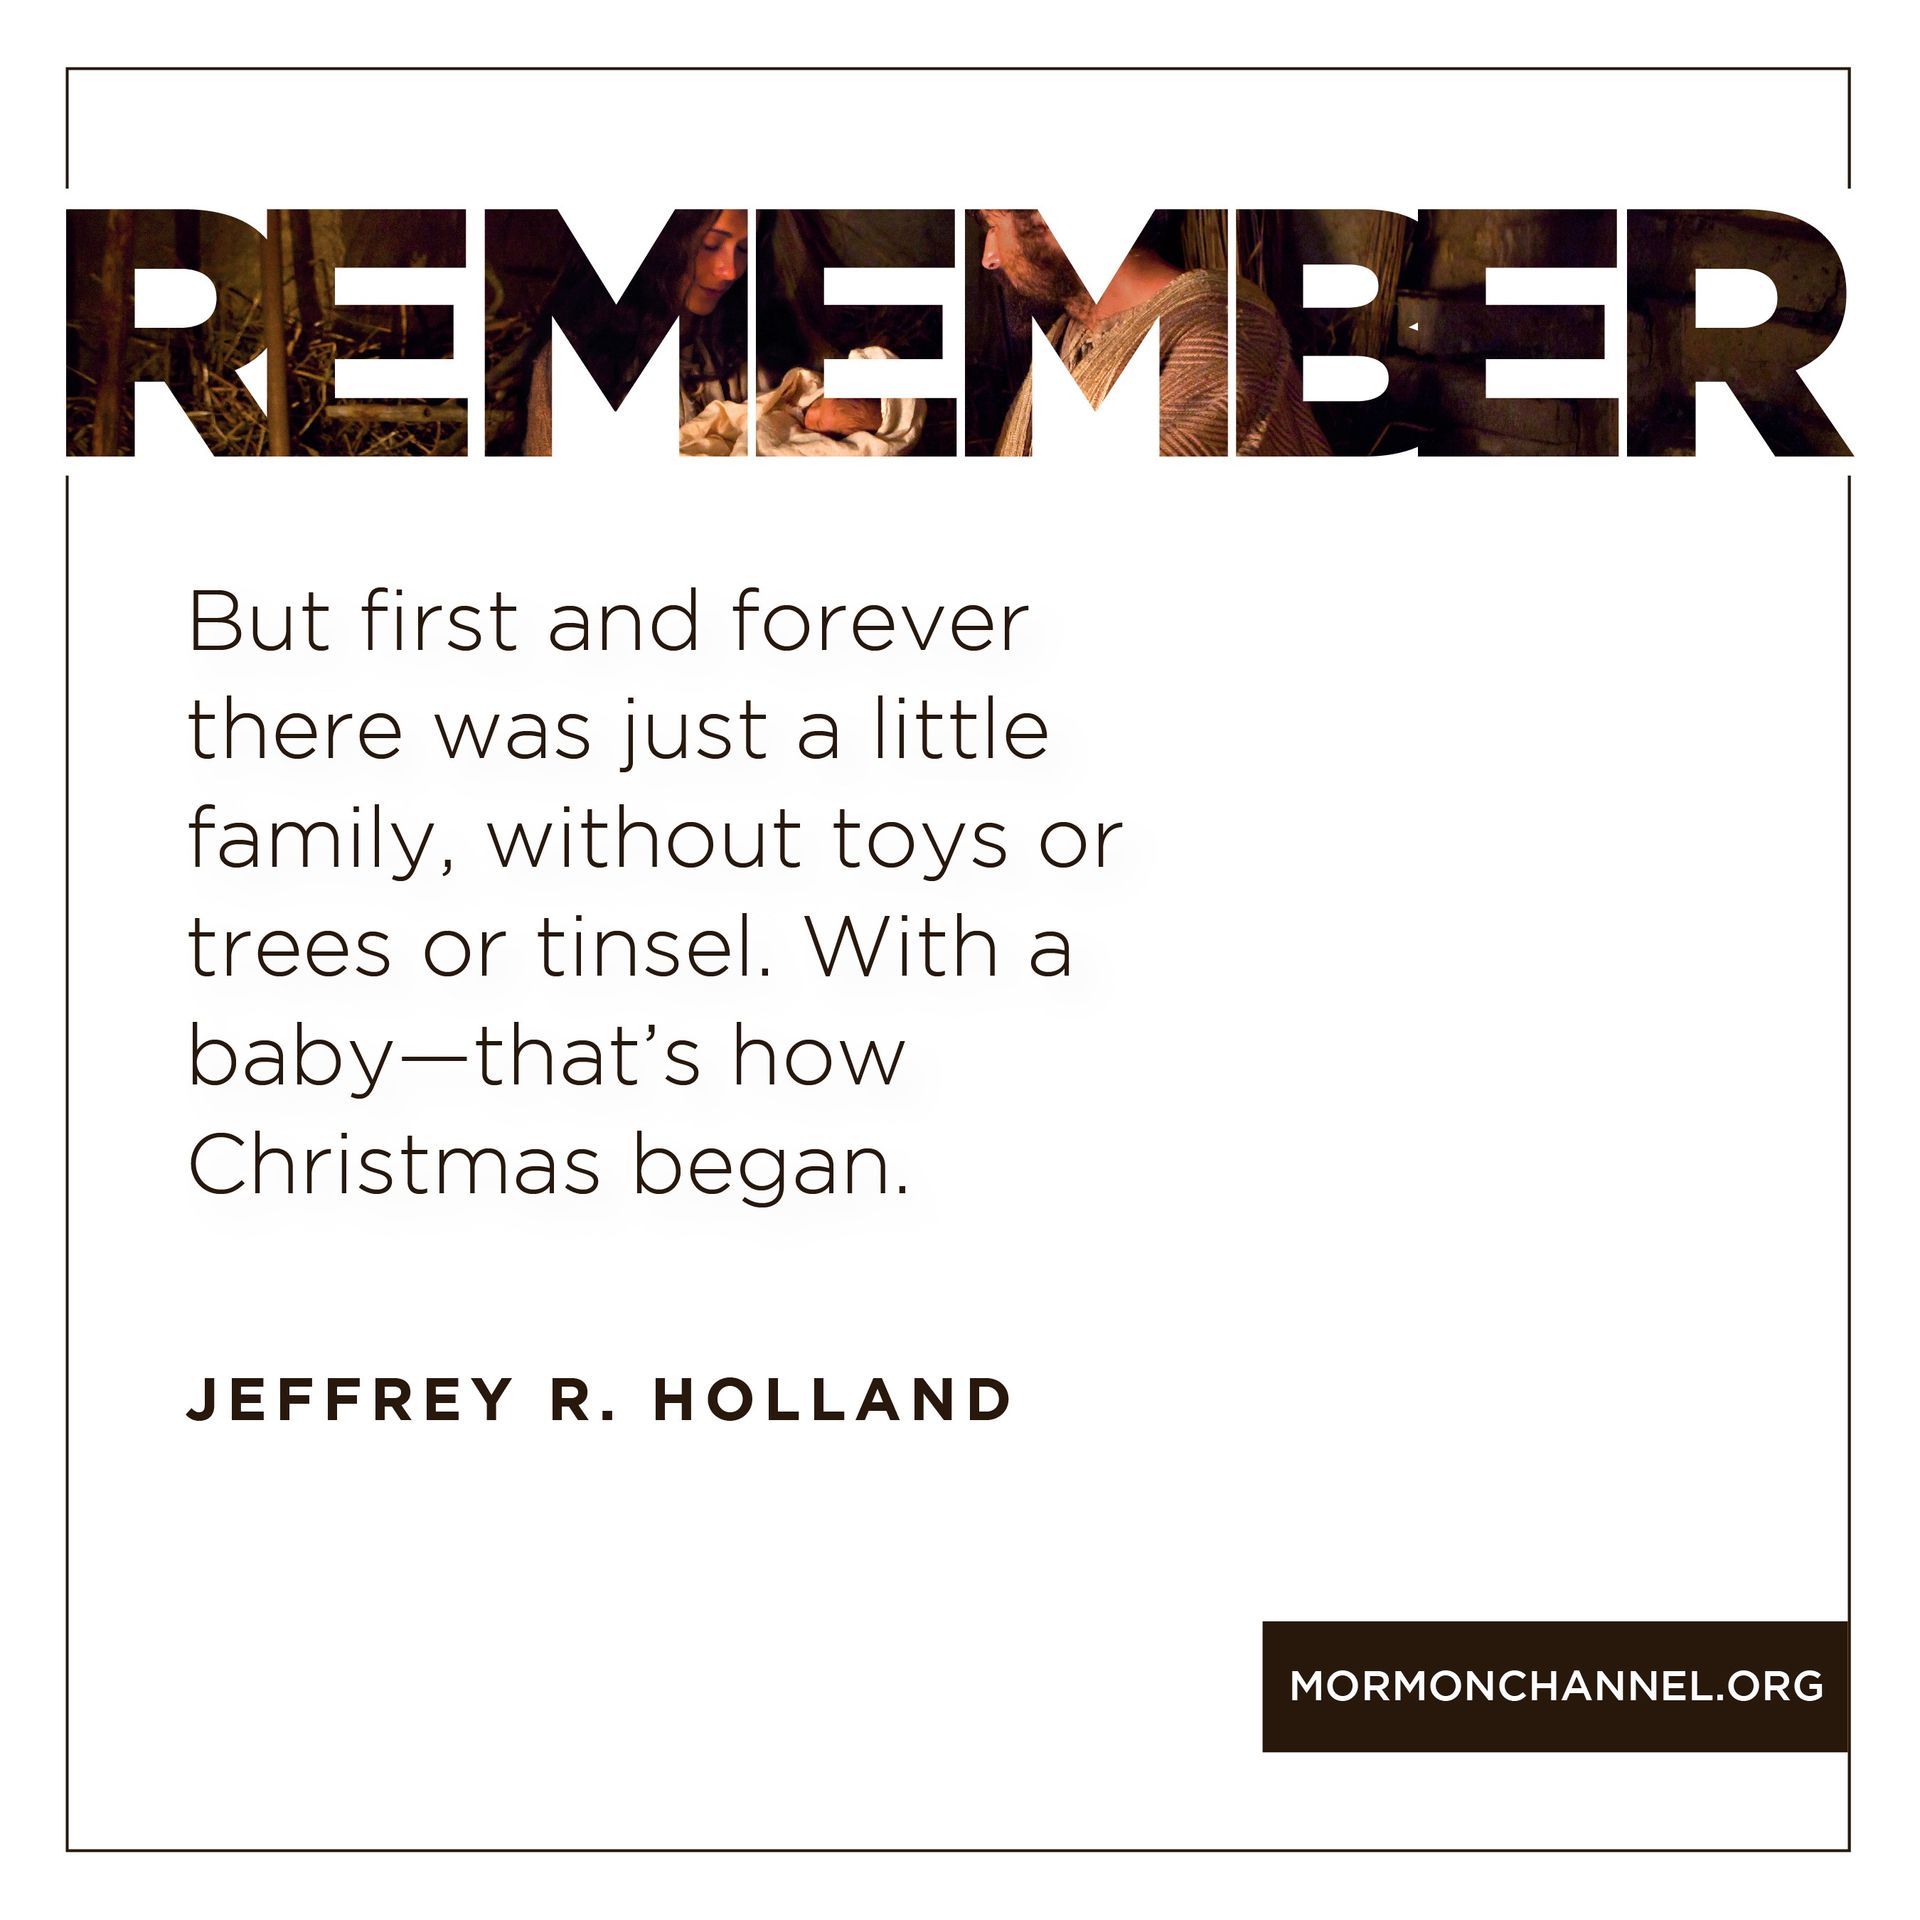 Remember: “But first and forever there was just a little family, without toys or trees or tinsel. With a baby—that’s how Christmas began.”—Elder Jeffrey R. Holland, “Maybe Christmas Doesn’t Come from a Store” © undefined ipCode 1.